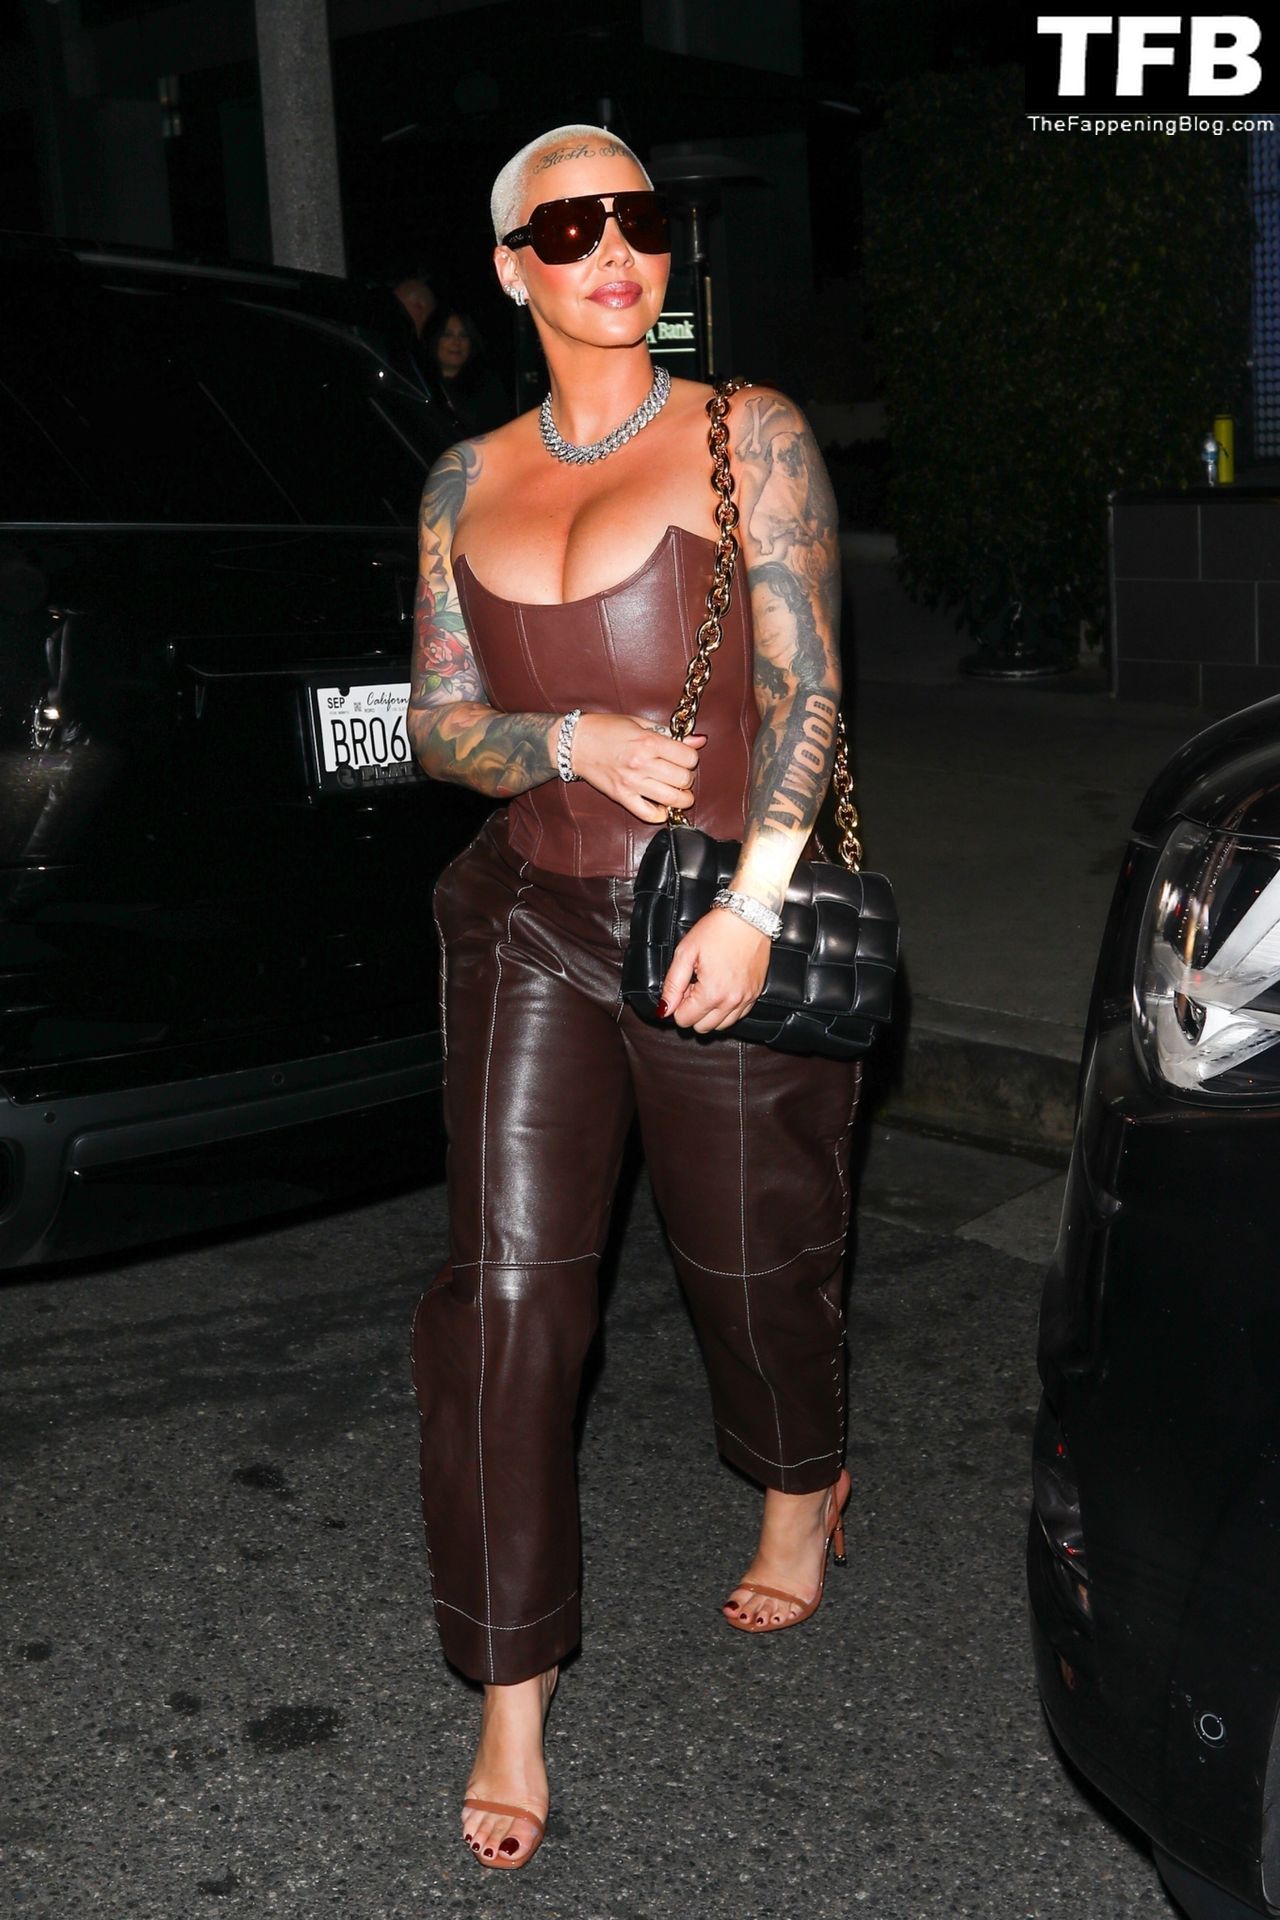 Amber-Rose-Sexy-The-Fappening-Blog-32.jpg